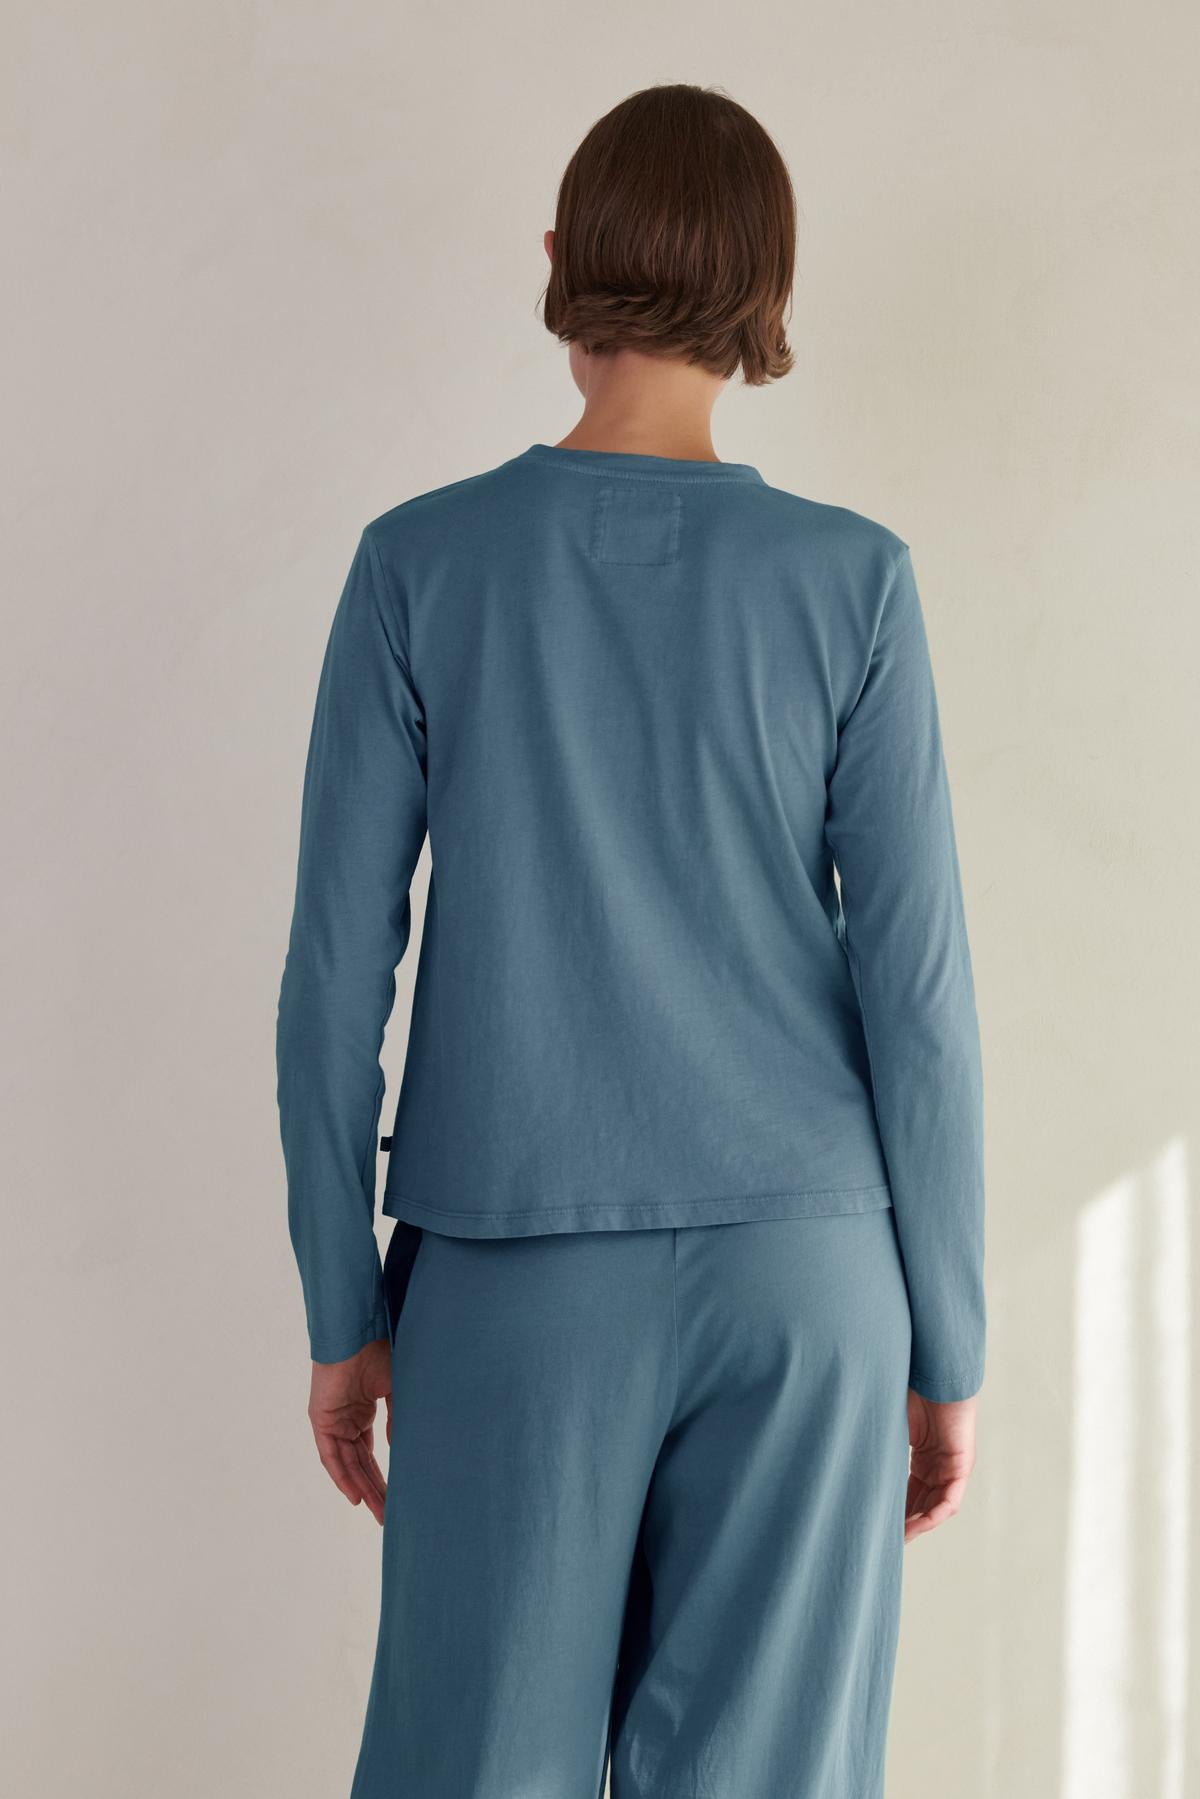   The woman is wearing a relaxed fit blue long-sleeved VICENTE TEE by Velvet by Jenny Graham and pants. 